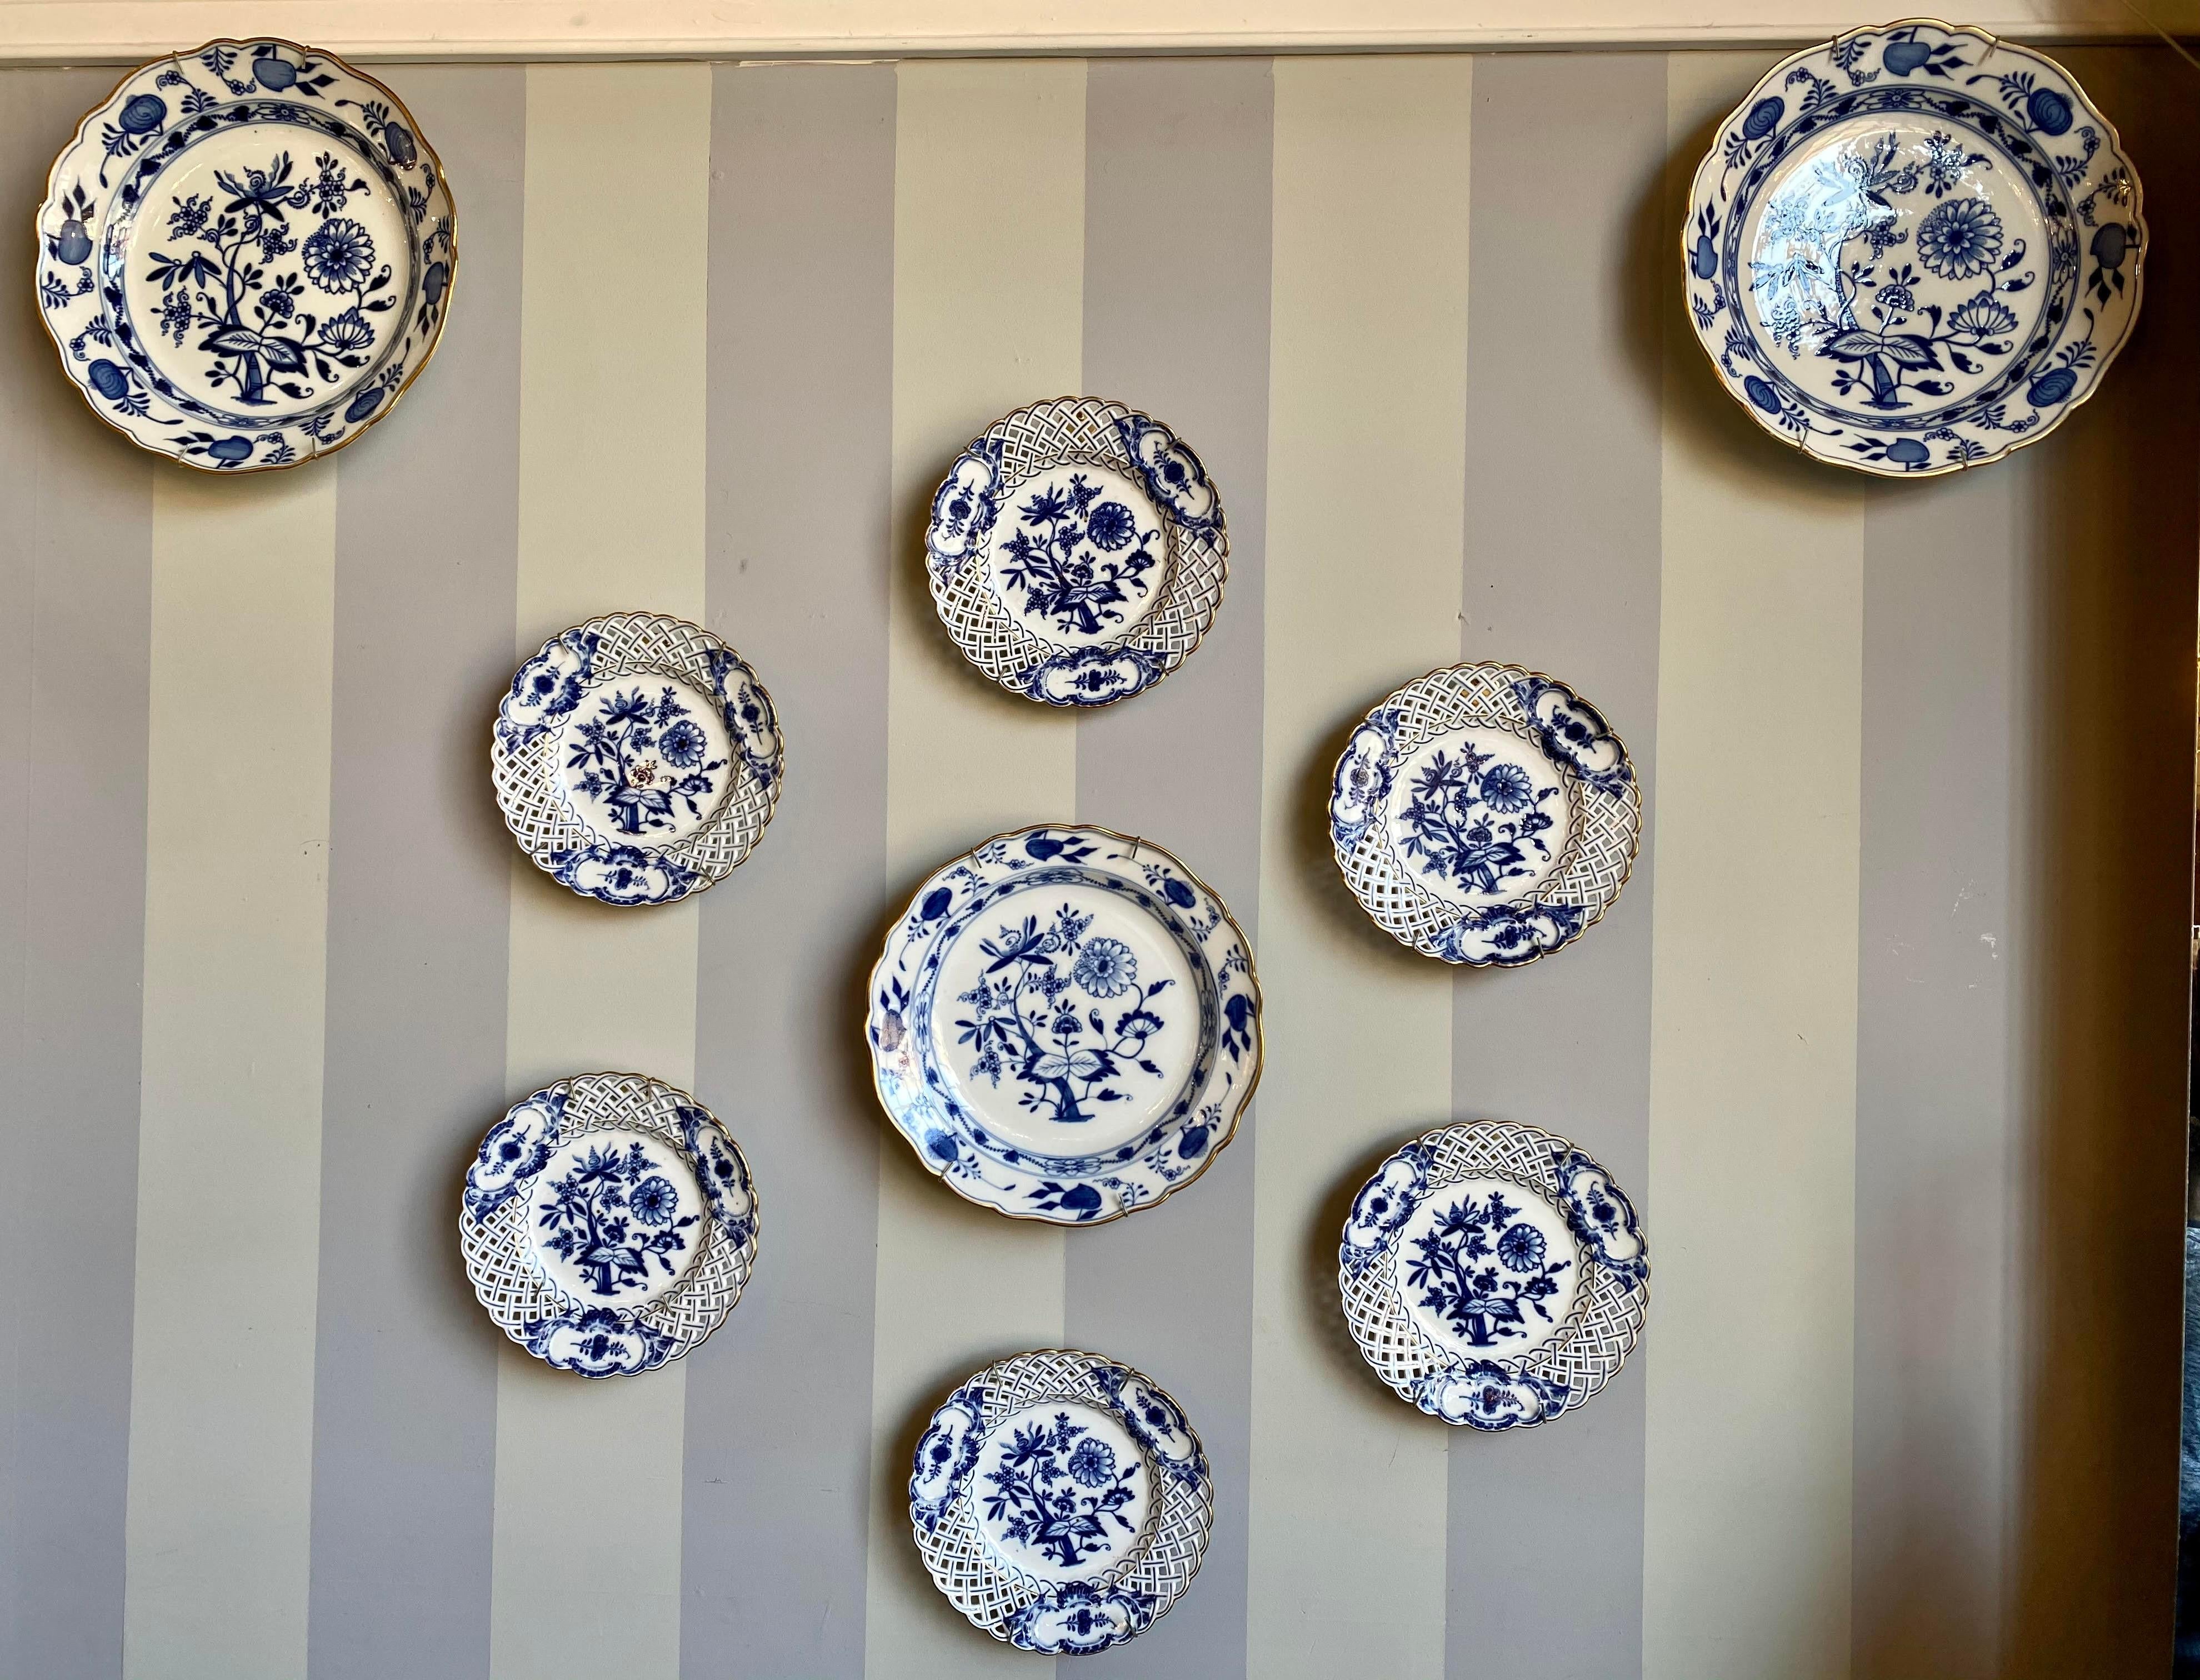 Nine blue onion Meissen show or wall plates. This is a stunning collection of blue white wall platters purchased from a NYC Socialite at the Beekman on the East side of Manhattan. These pieces are usually found one or two at a time. This collector